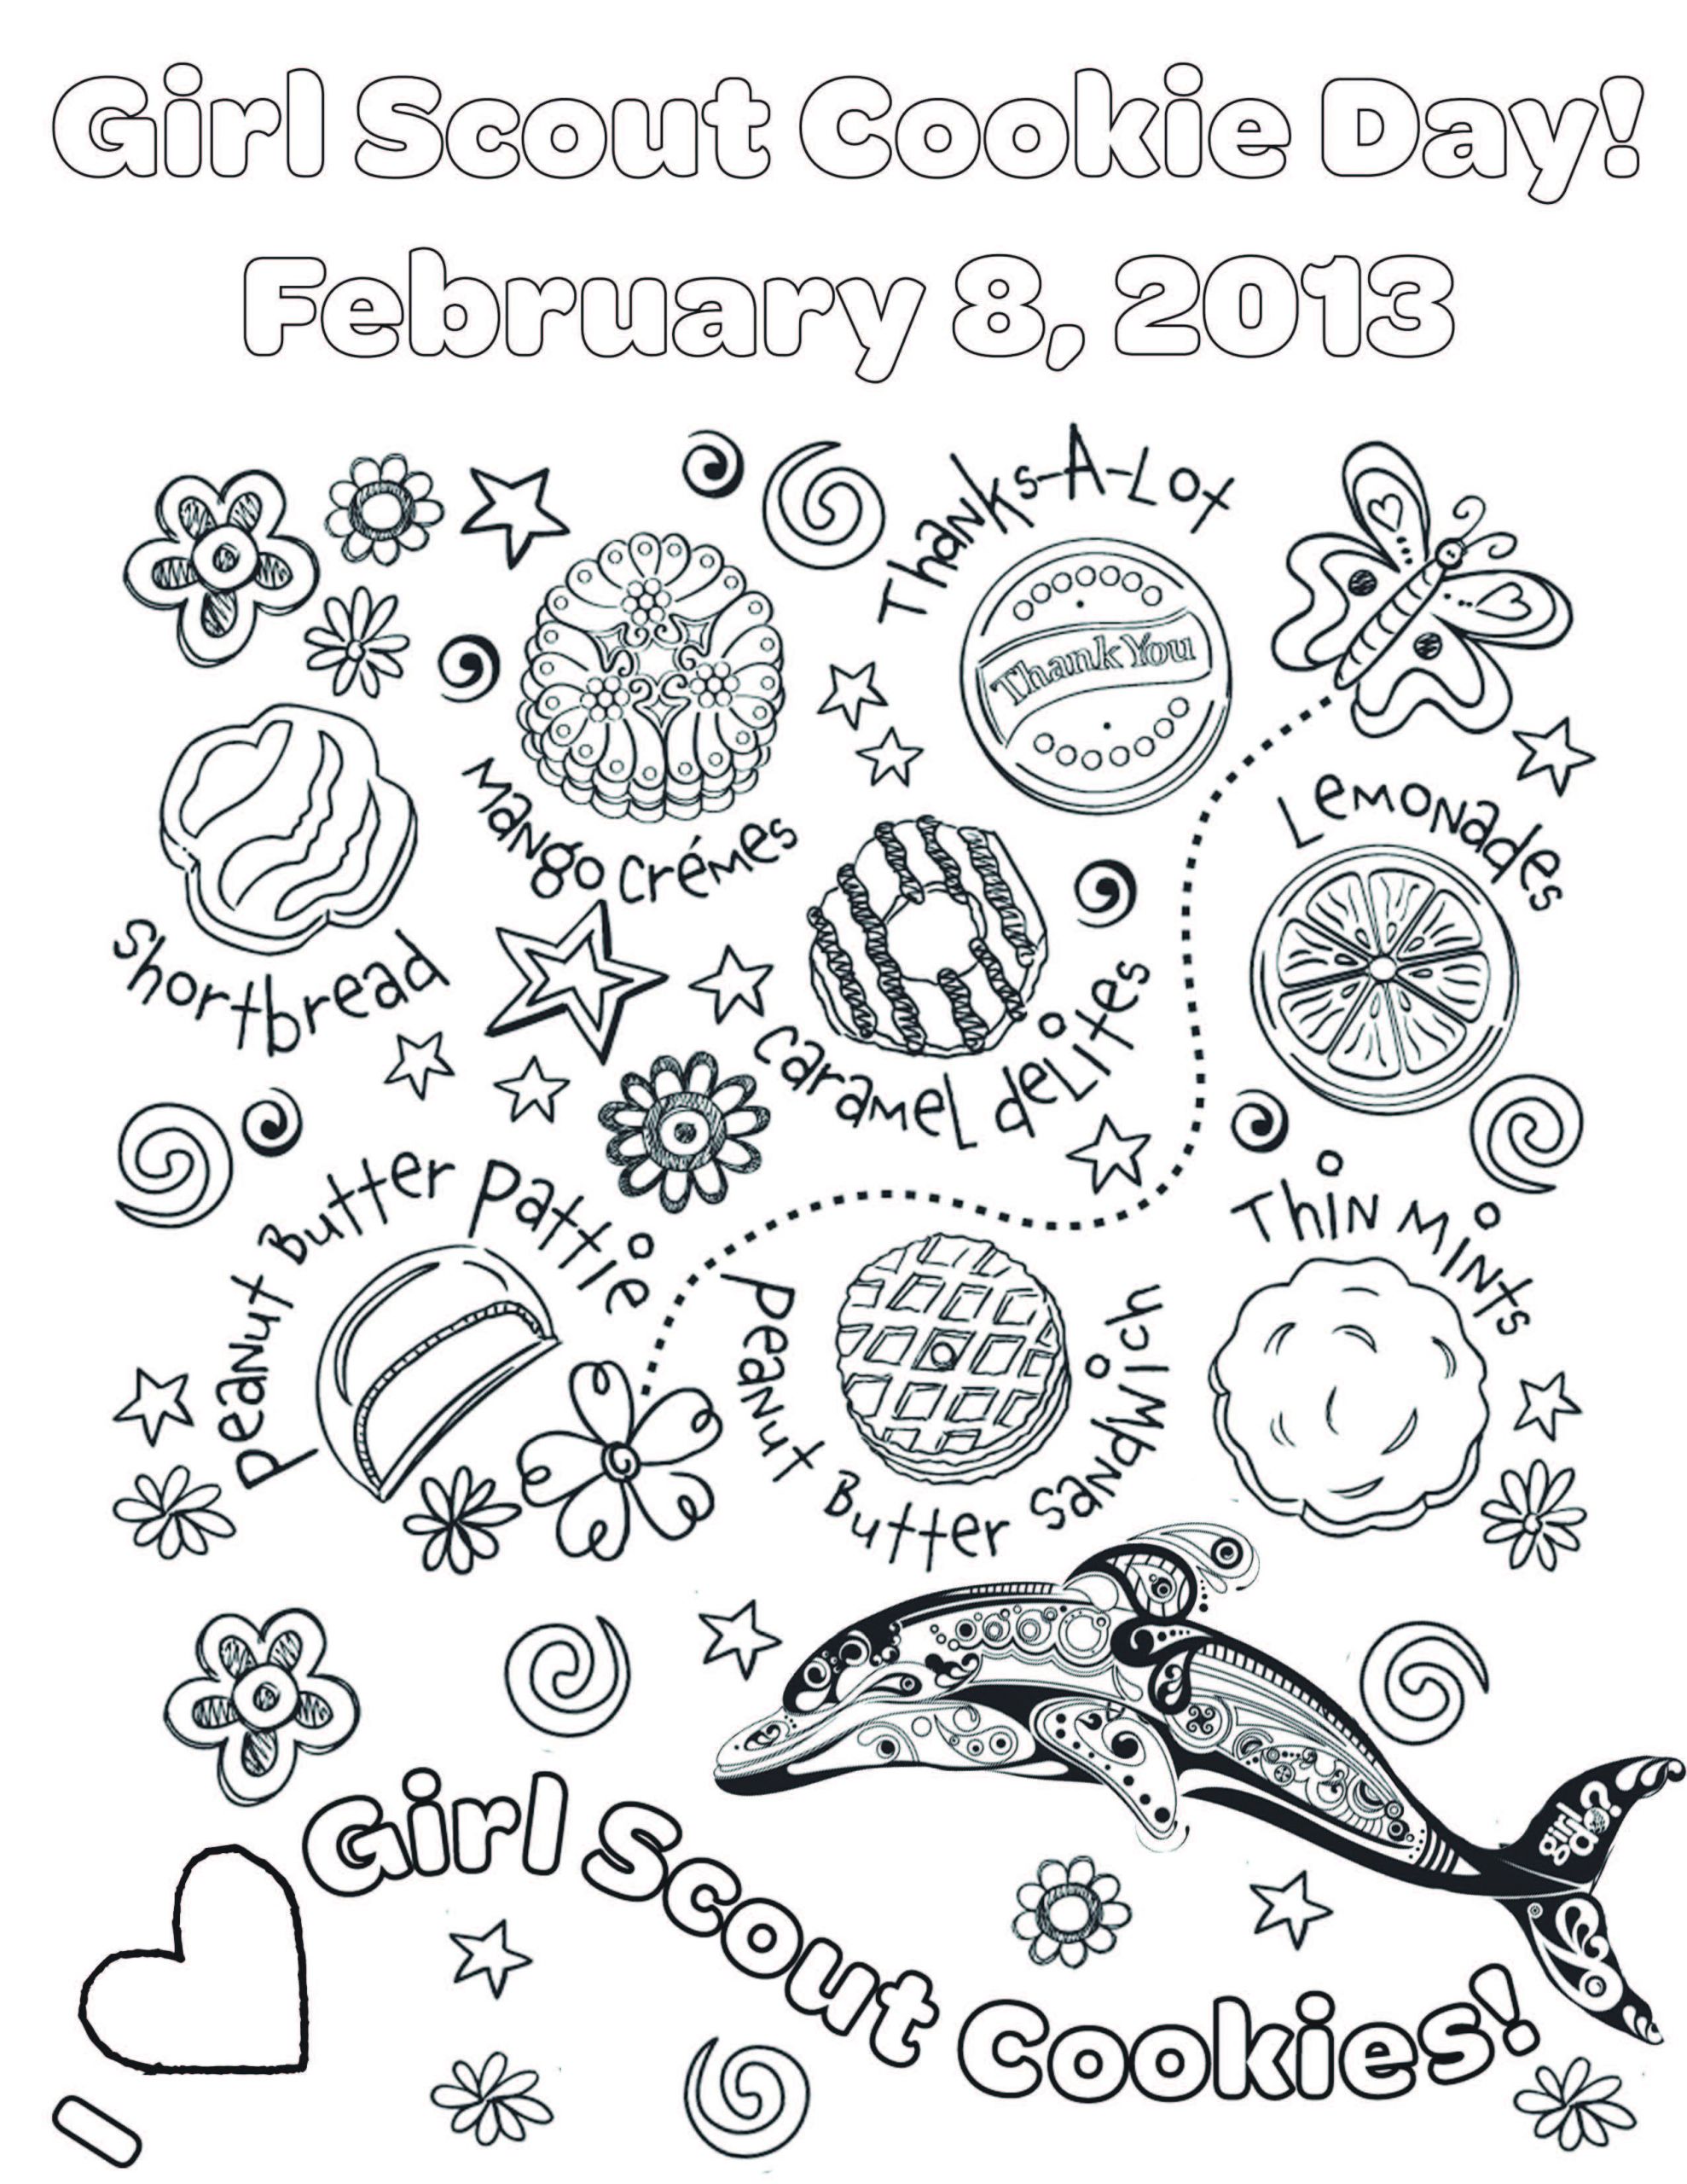 Girls Scout Cookie Coloring Pages
 National Girl Scout Cookie Day on Feb 8th